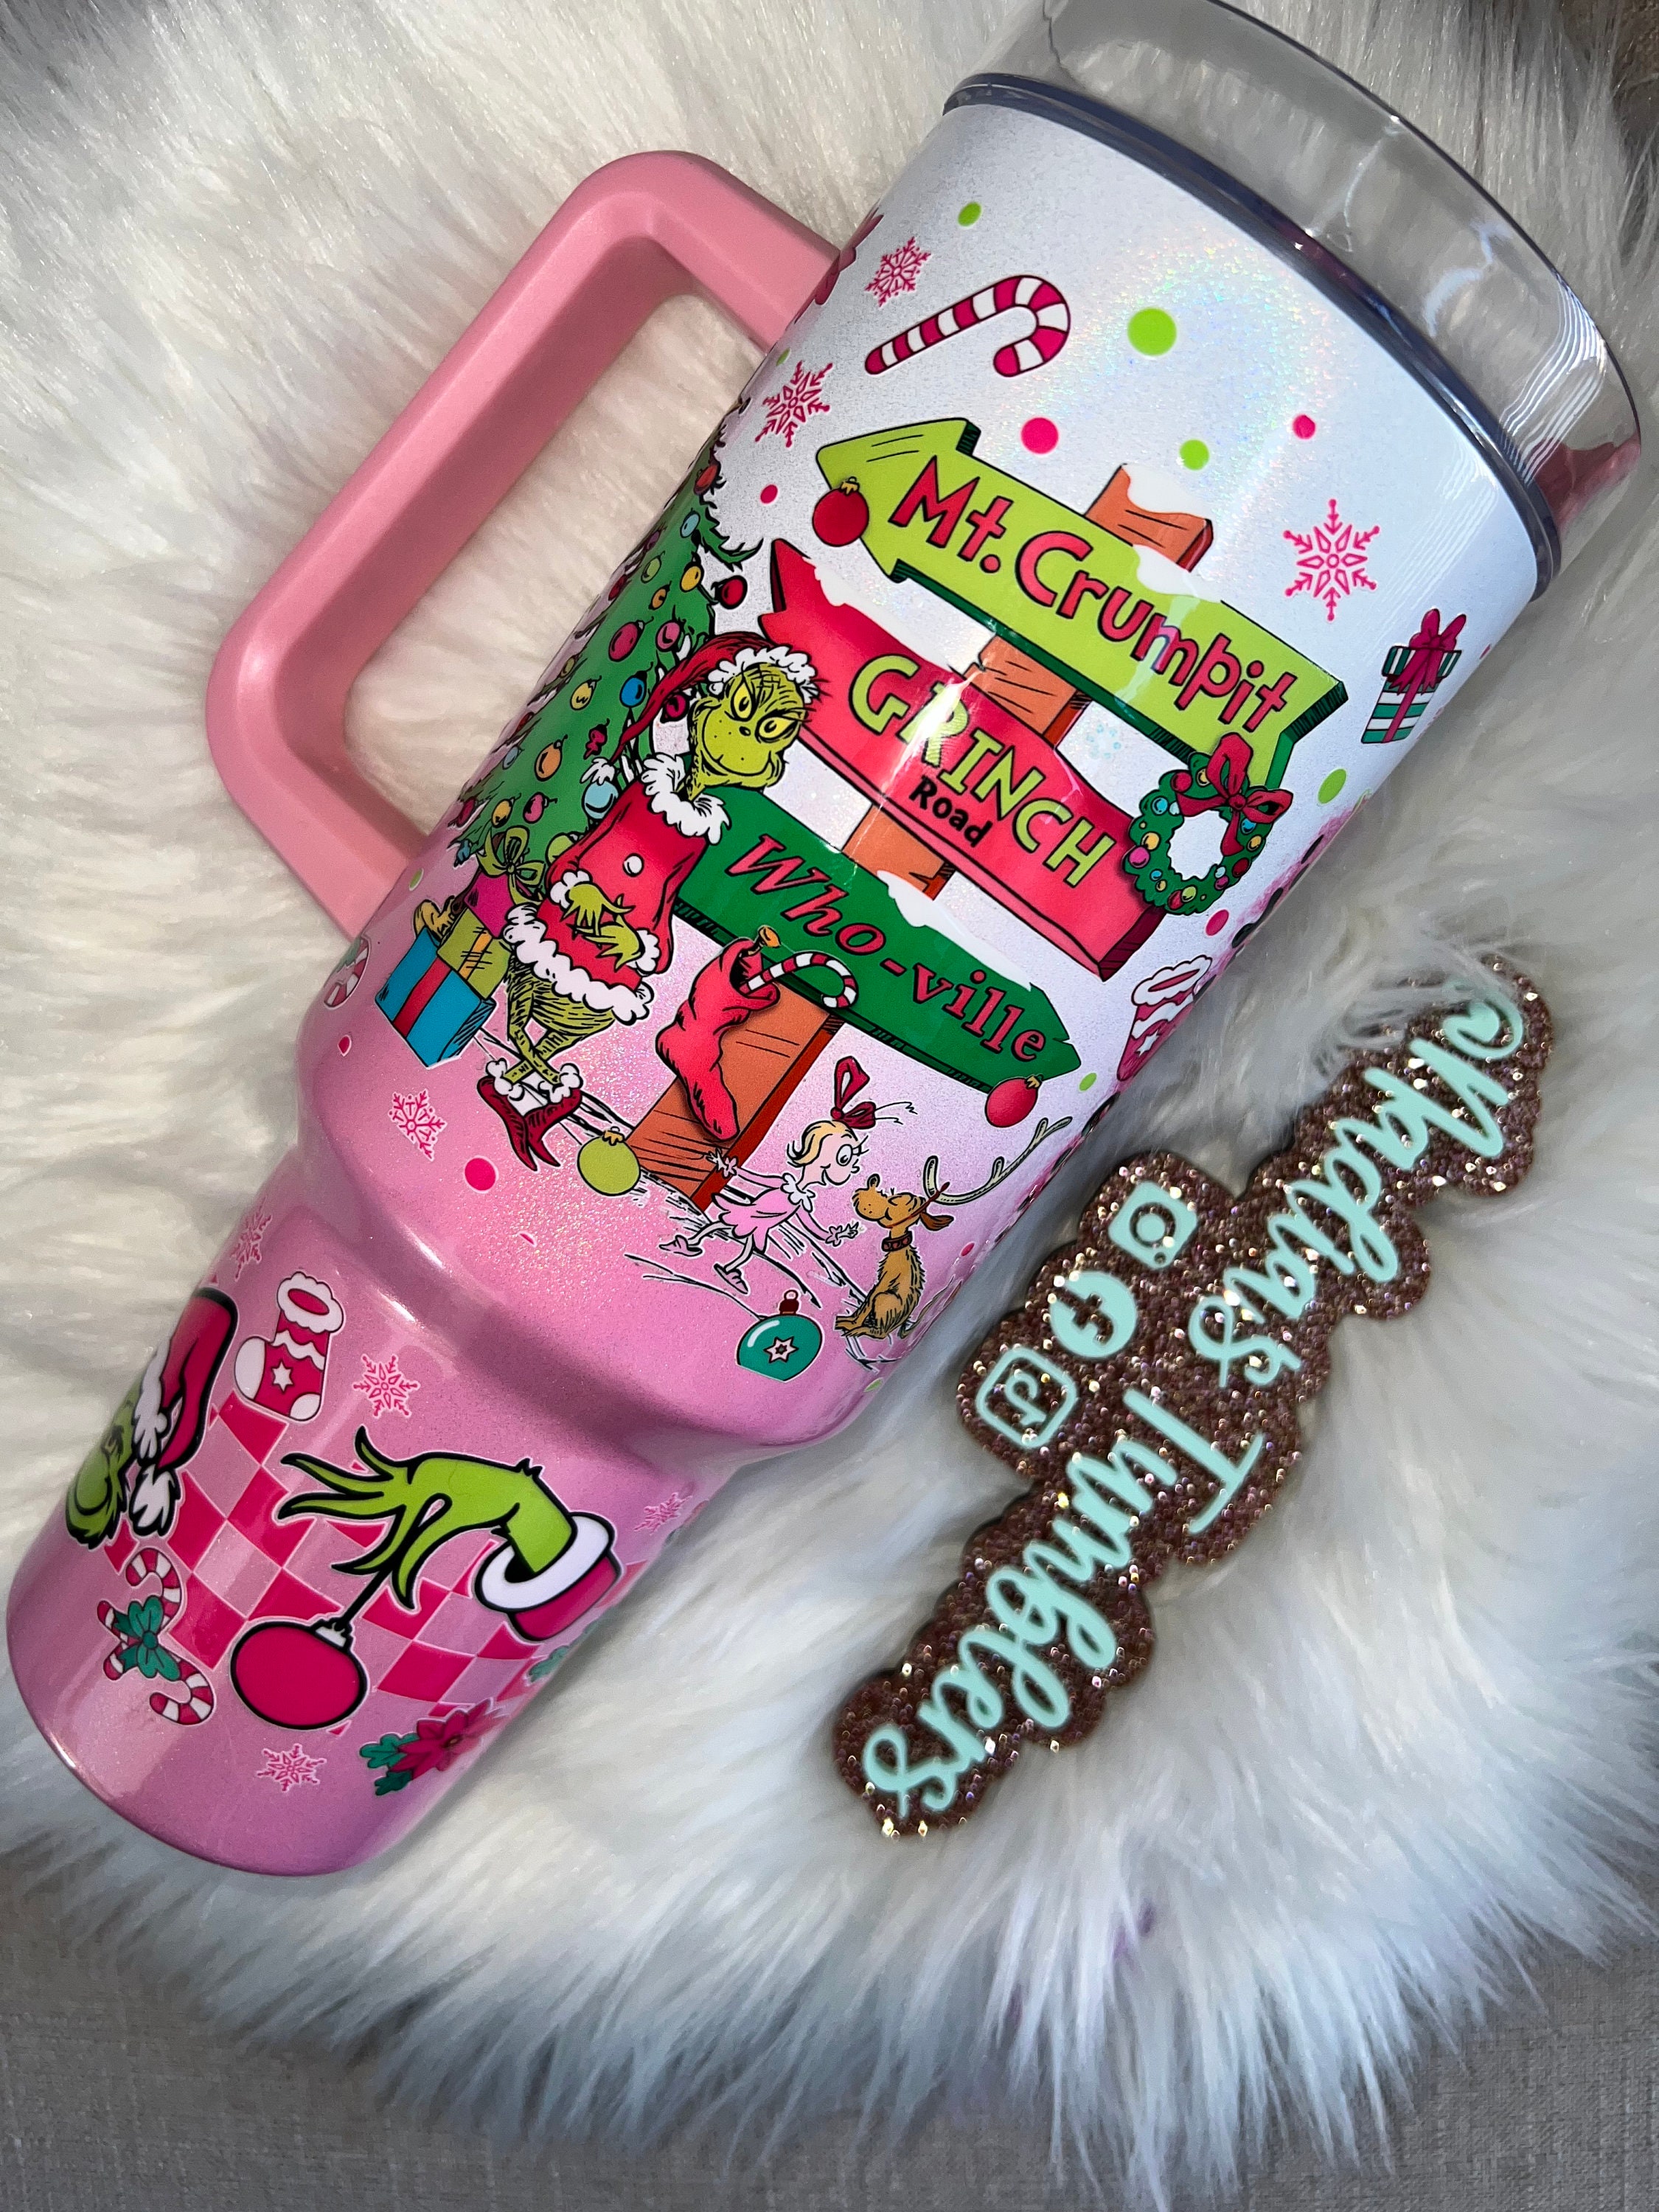 Grinch Tumbler Pink Christmas 40Oz Stainless Steel Stanley Cups Christmas  Movie Gift Merry Grinchmas Whoville University Travel Mugs - Laughinks